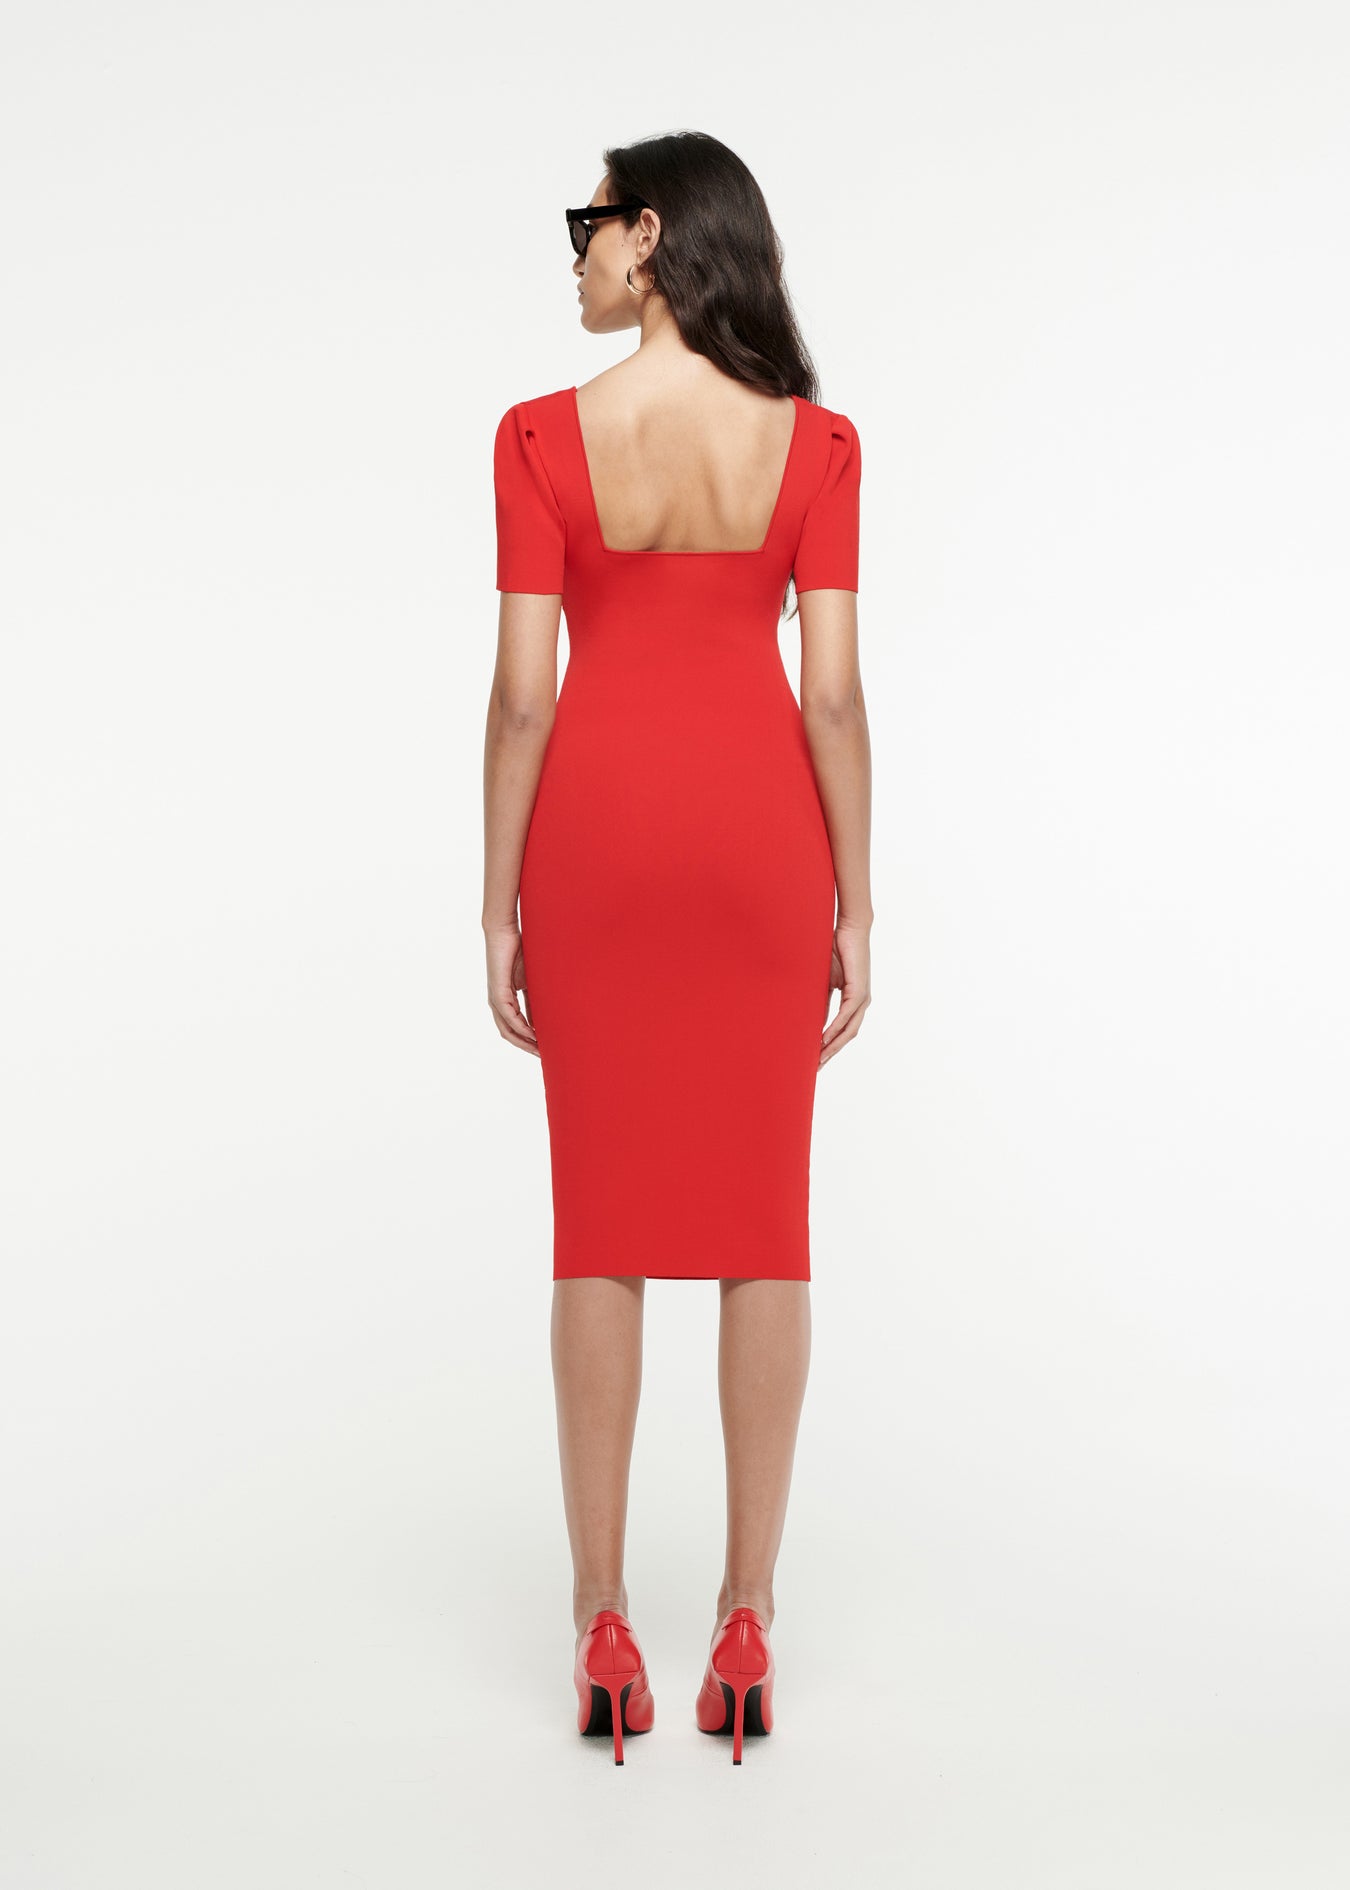 The back of a woman wearing the Short Sleeve Knit Midi Dress in Red